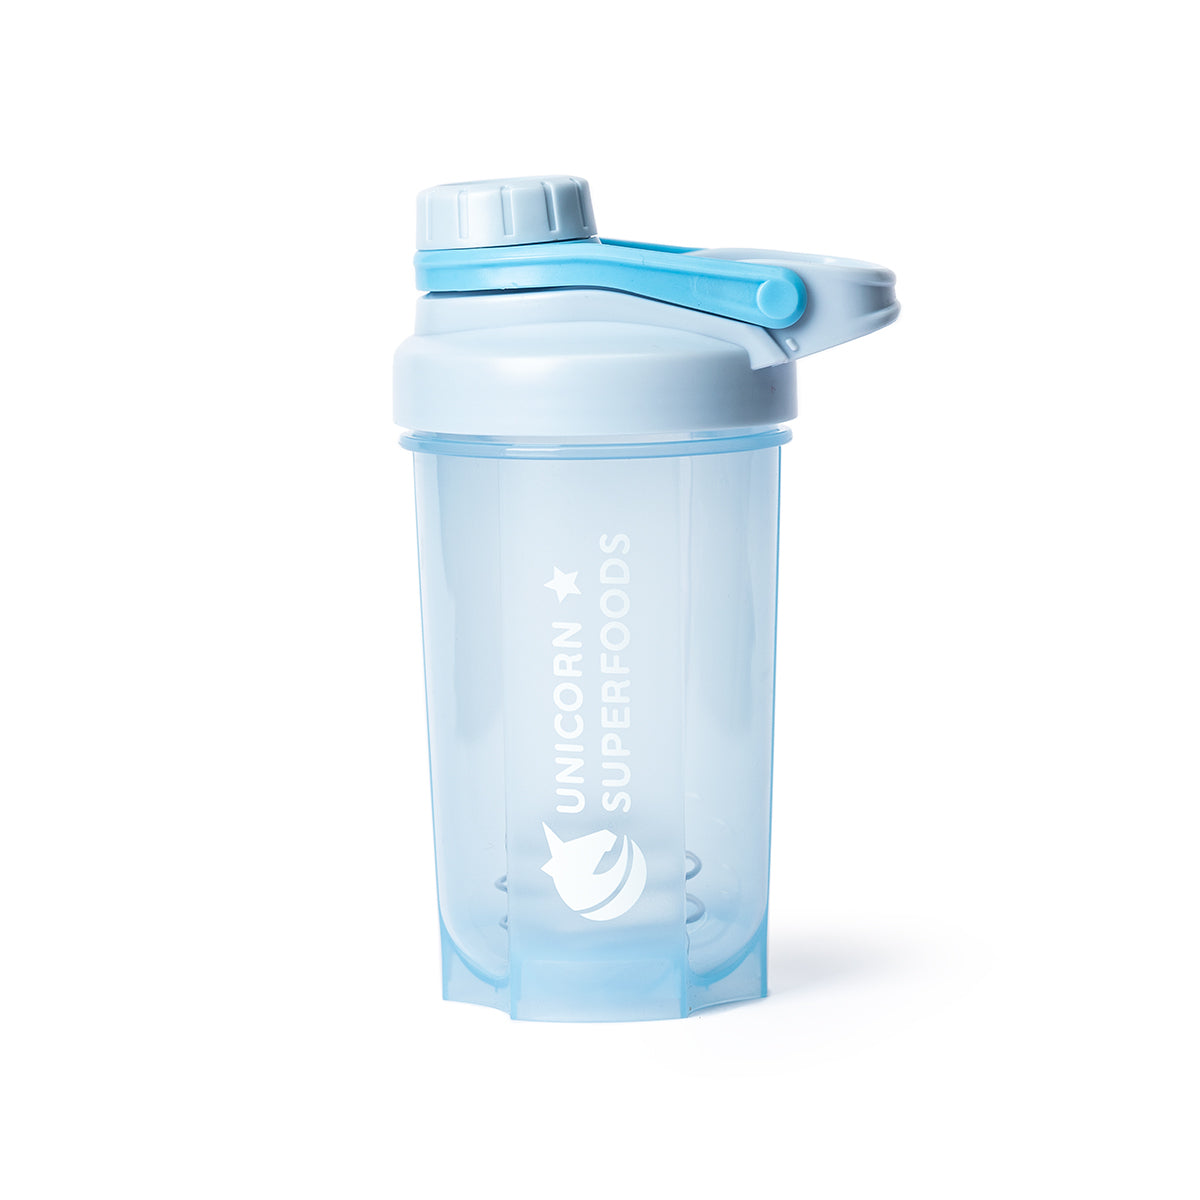  YAYAYOUNG Protein Shaker Bottle,16-OZ/500ML Shaker Bottle with protein  shaker ball, Protein Shakes Cup,Shaker Bottle for Protein Mixes,Free of BPA  plastic,Blue : Home & Kitchen